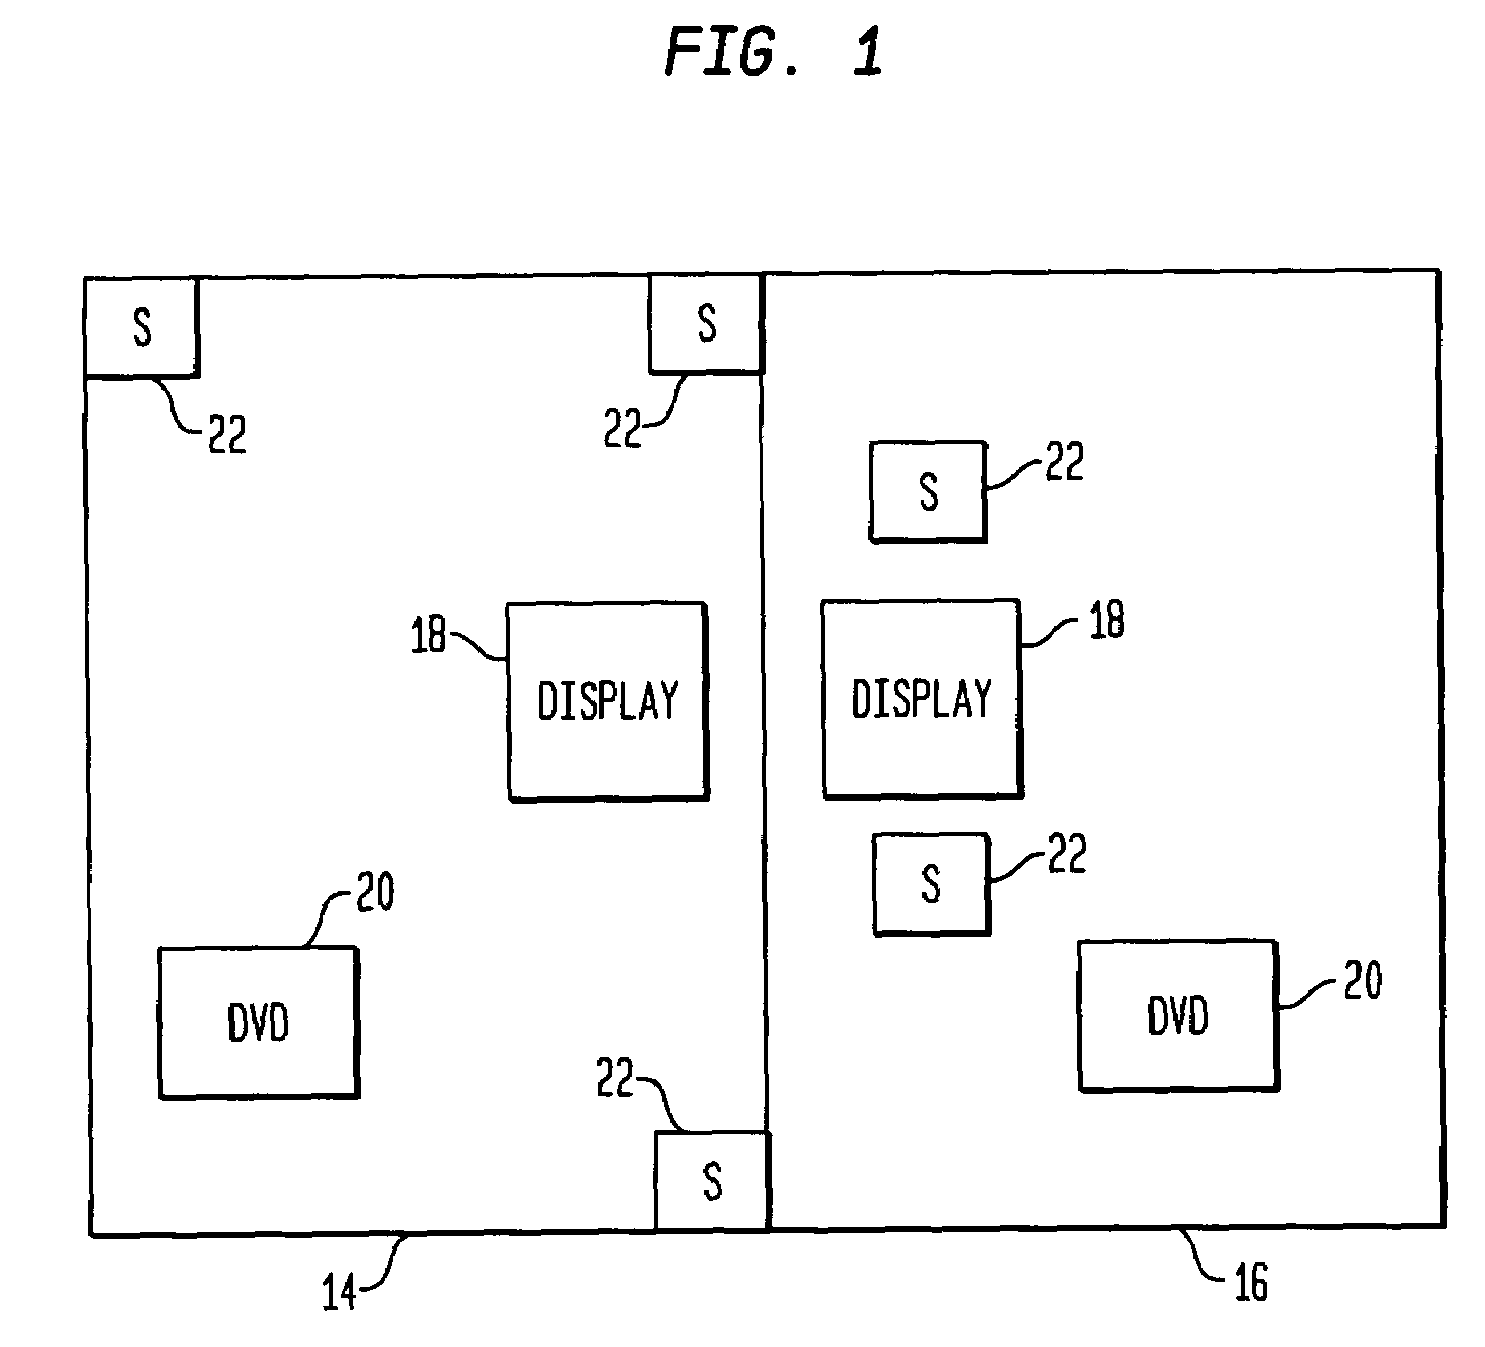 Method and apparatus for pairing and configuring wireless devices